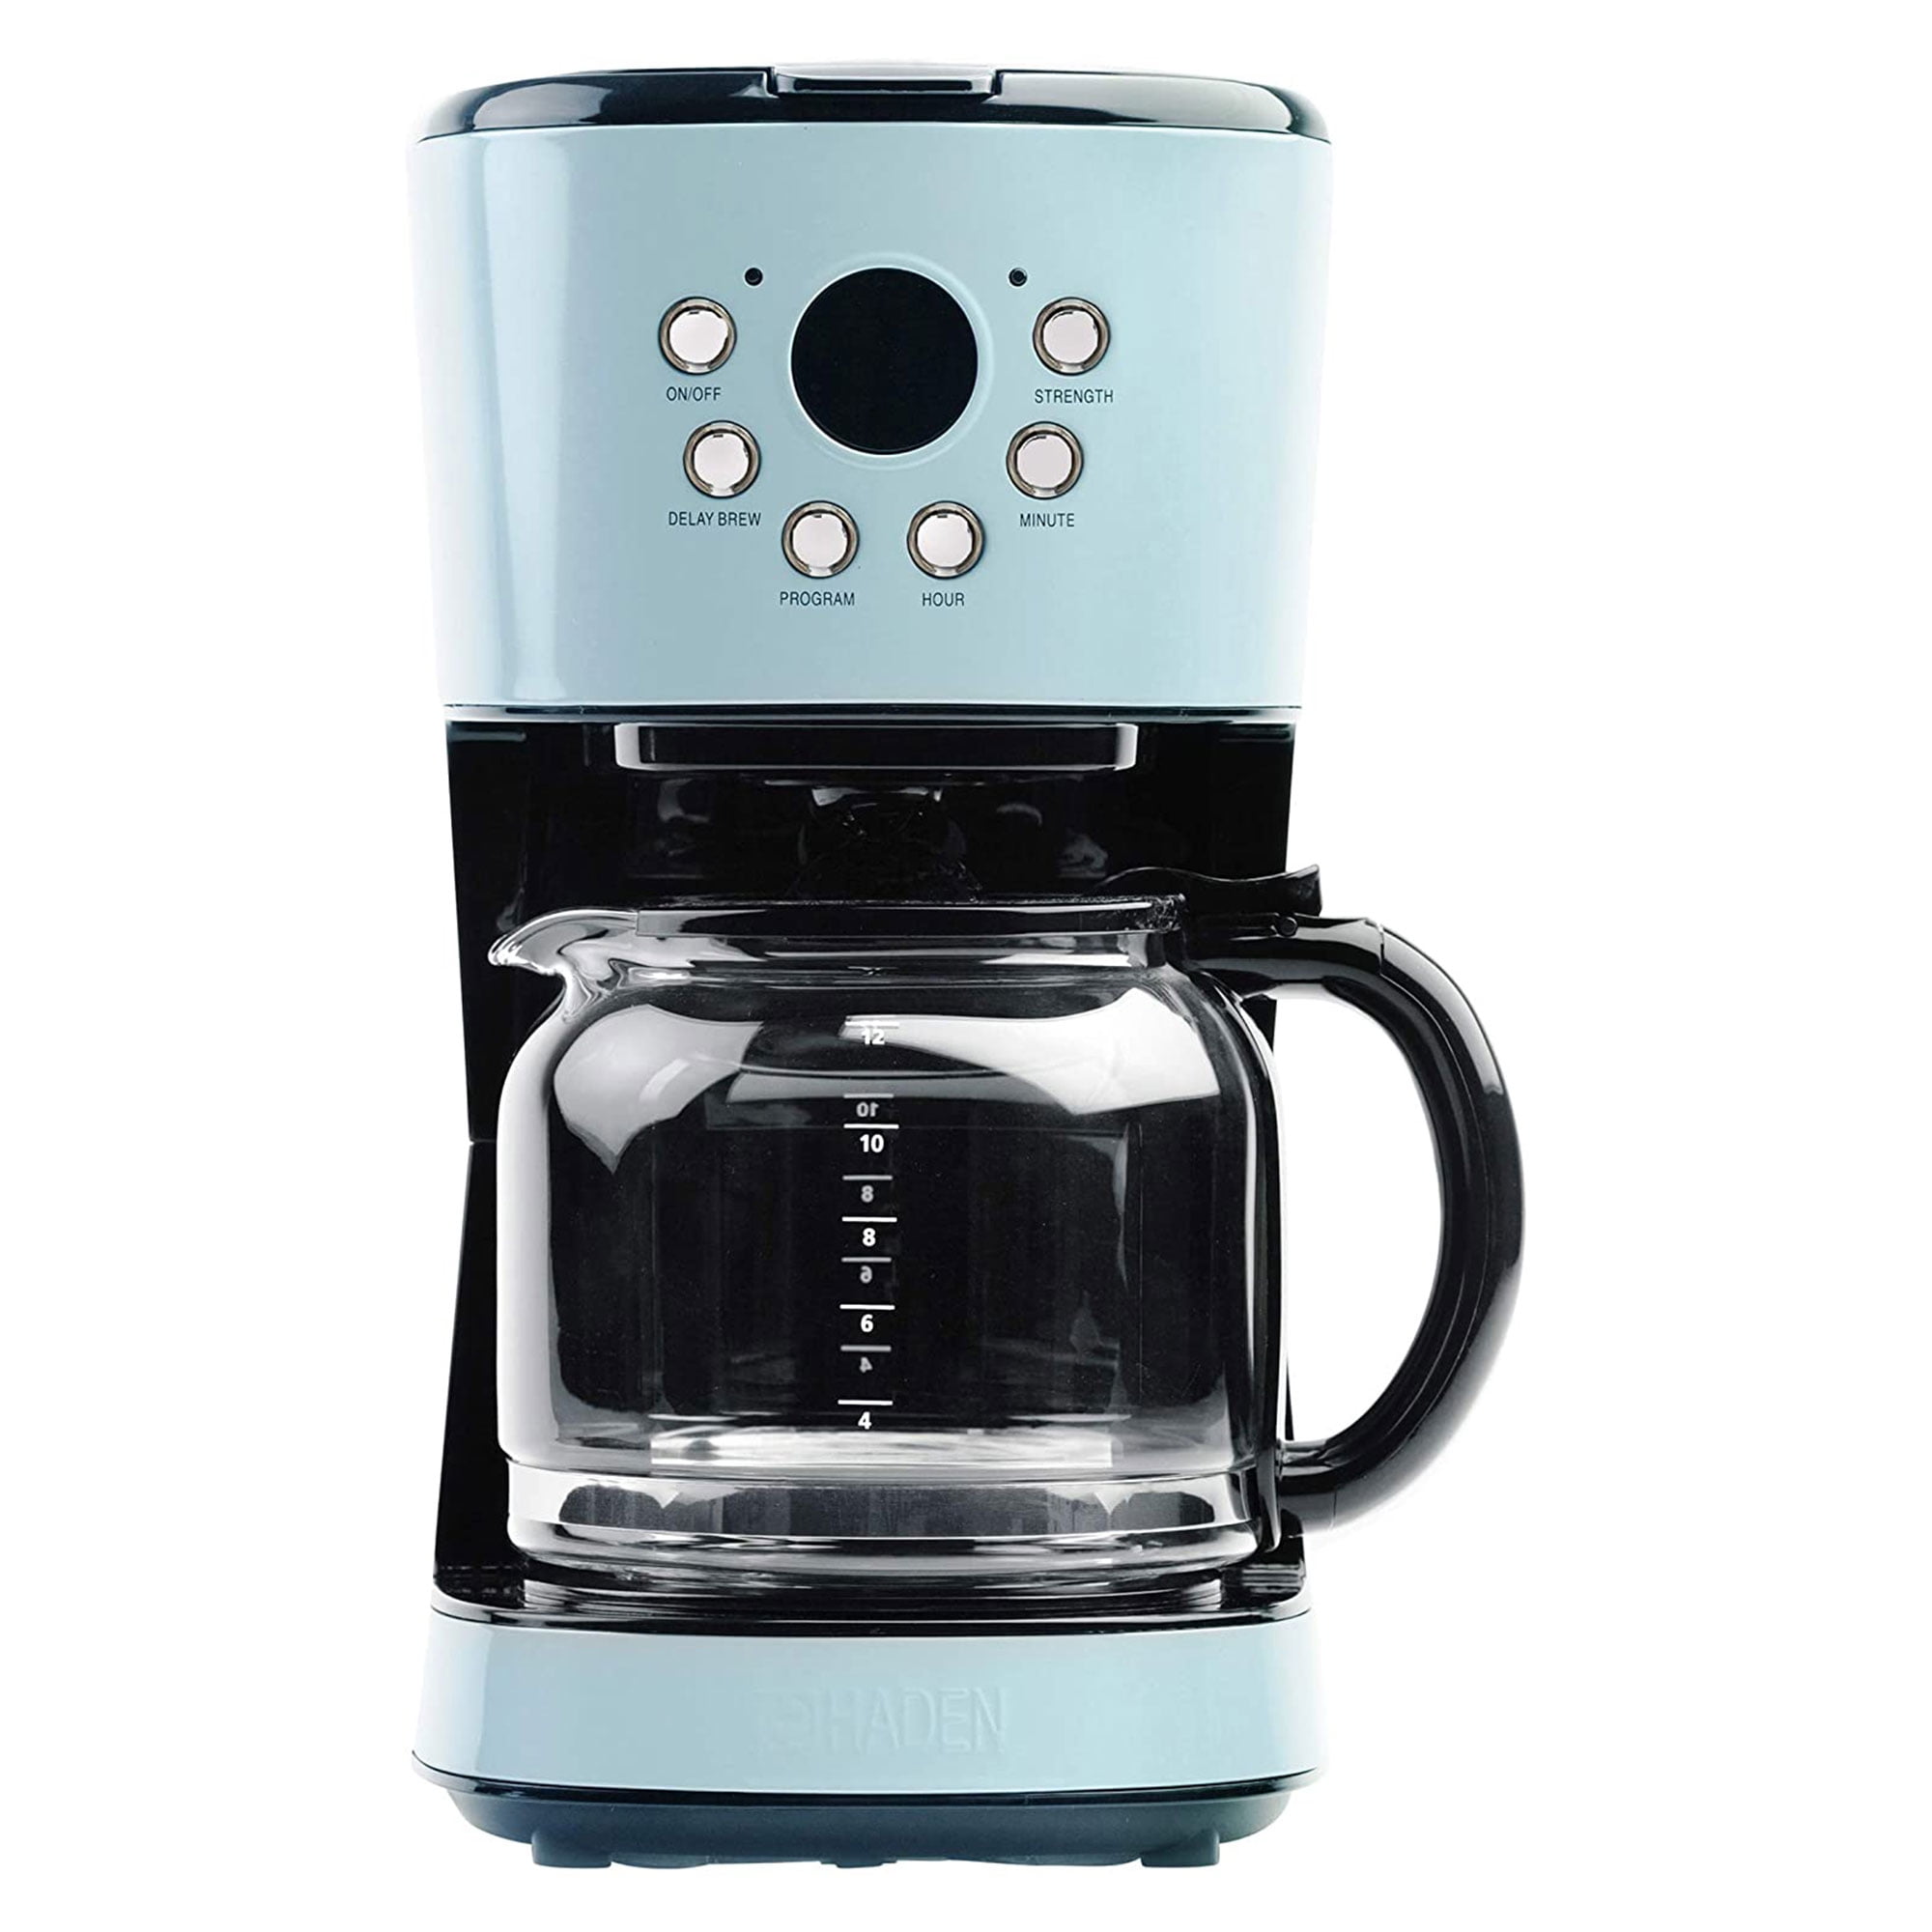 🪵 Dominican Natural Vintage Style Coffee Maker. 🖼 This is the